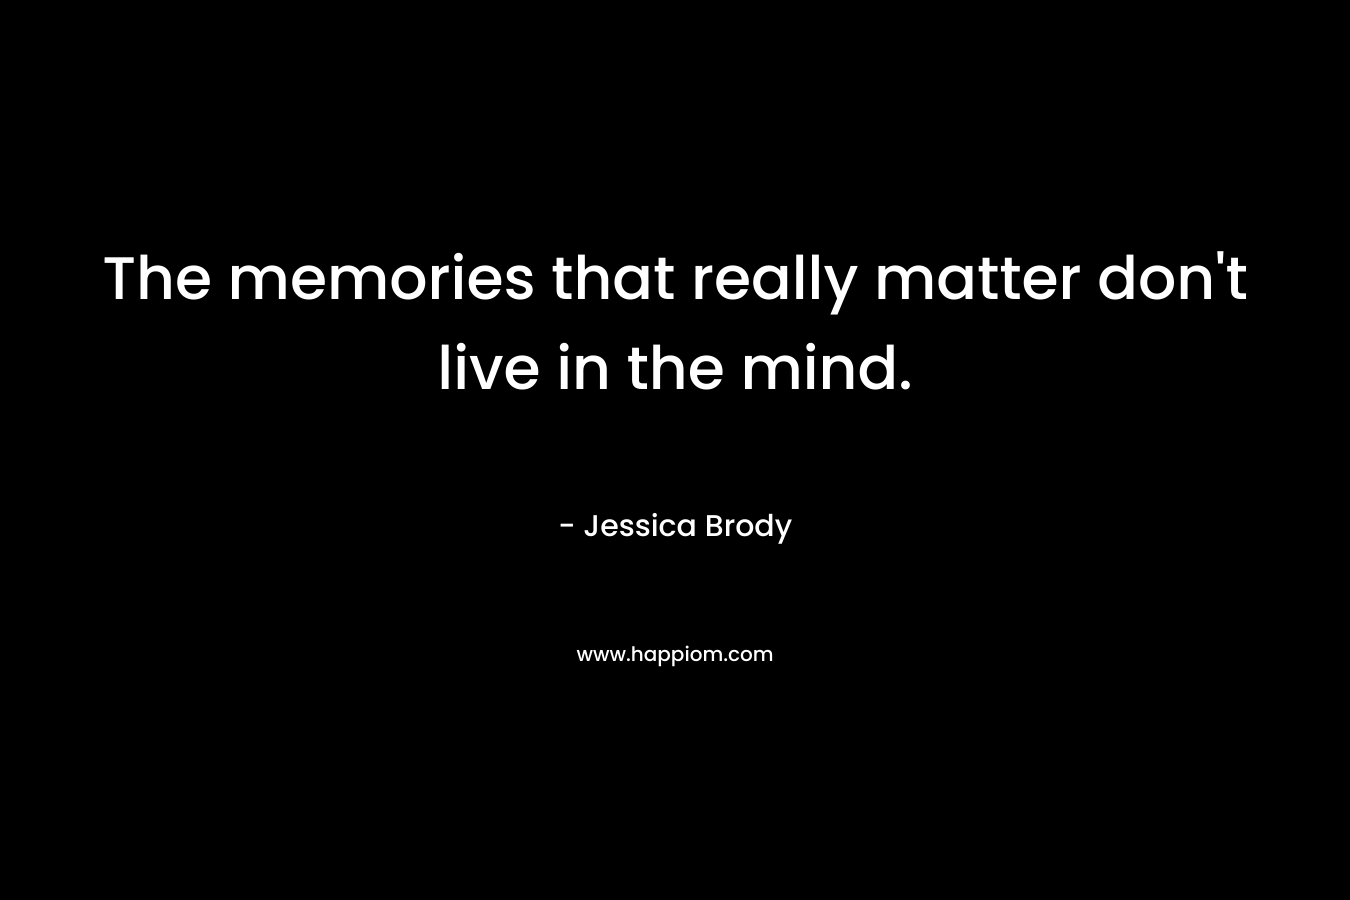 The memories that really matter don't live in the mind.